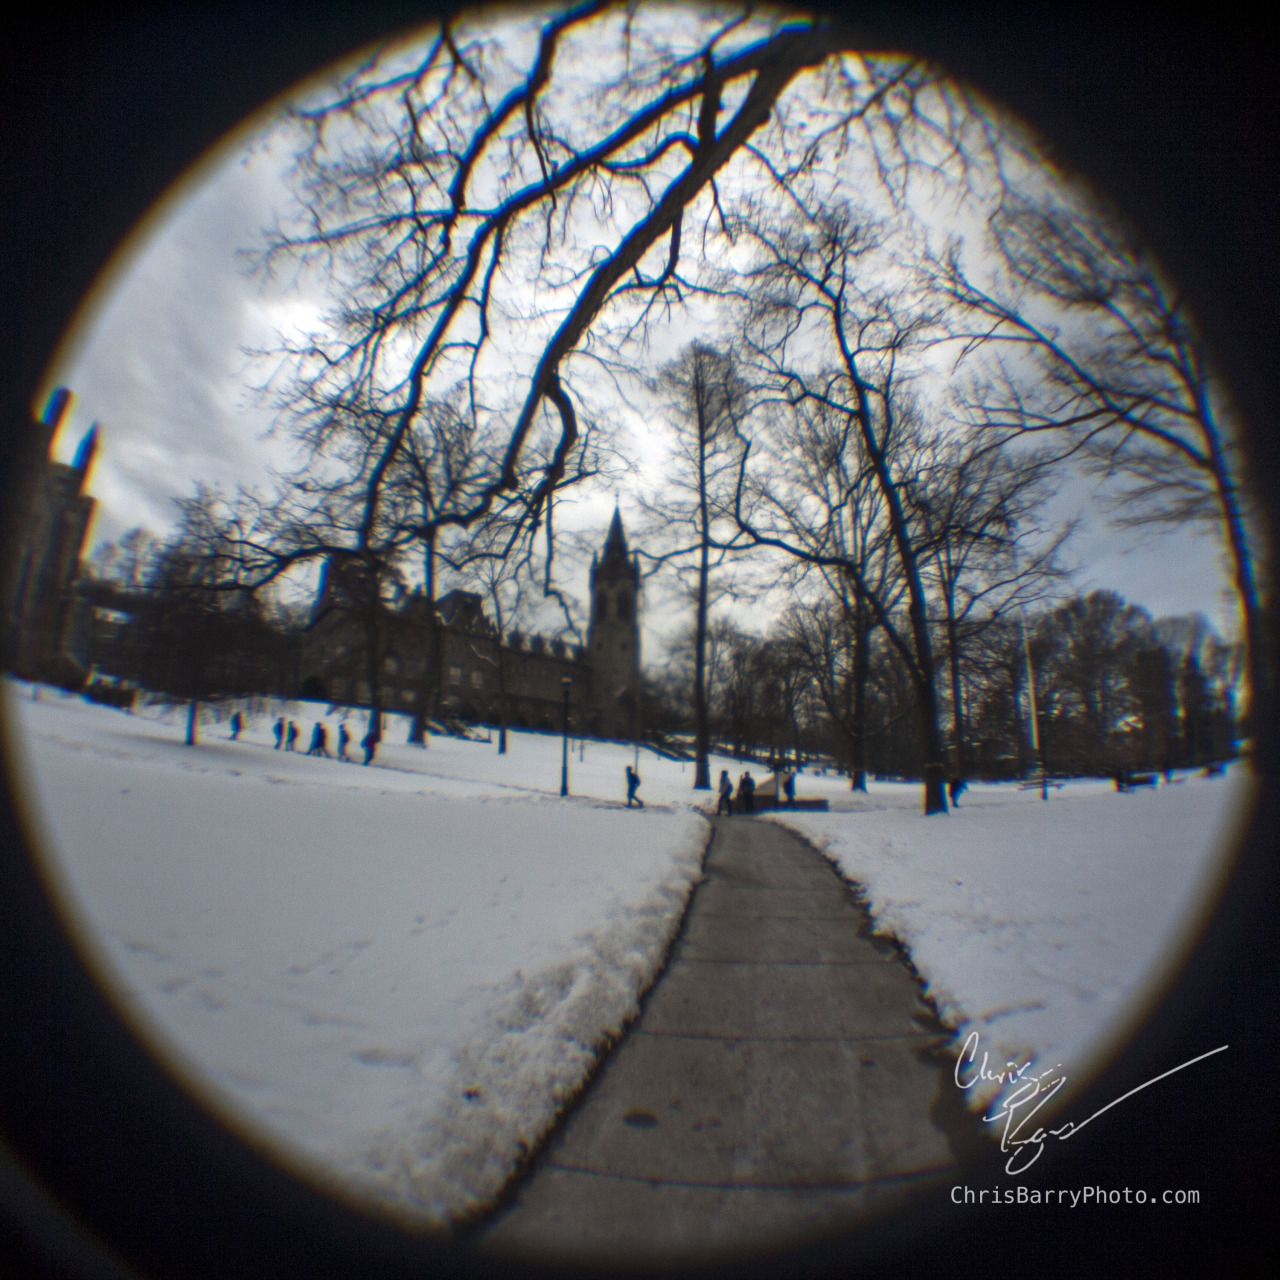 While I enjoy the fisheye, it&rsquo;s also kind of hard to use and I probably won&rsquo;t be using it very much